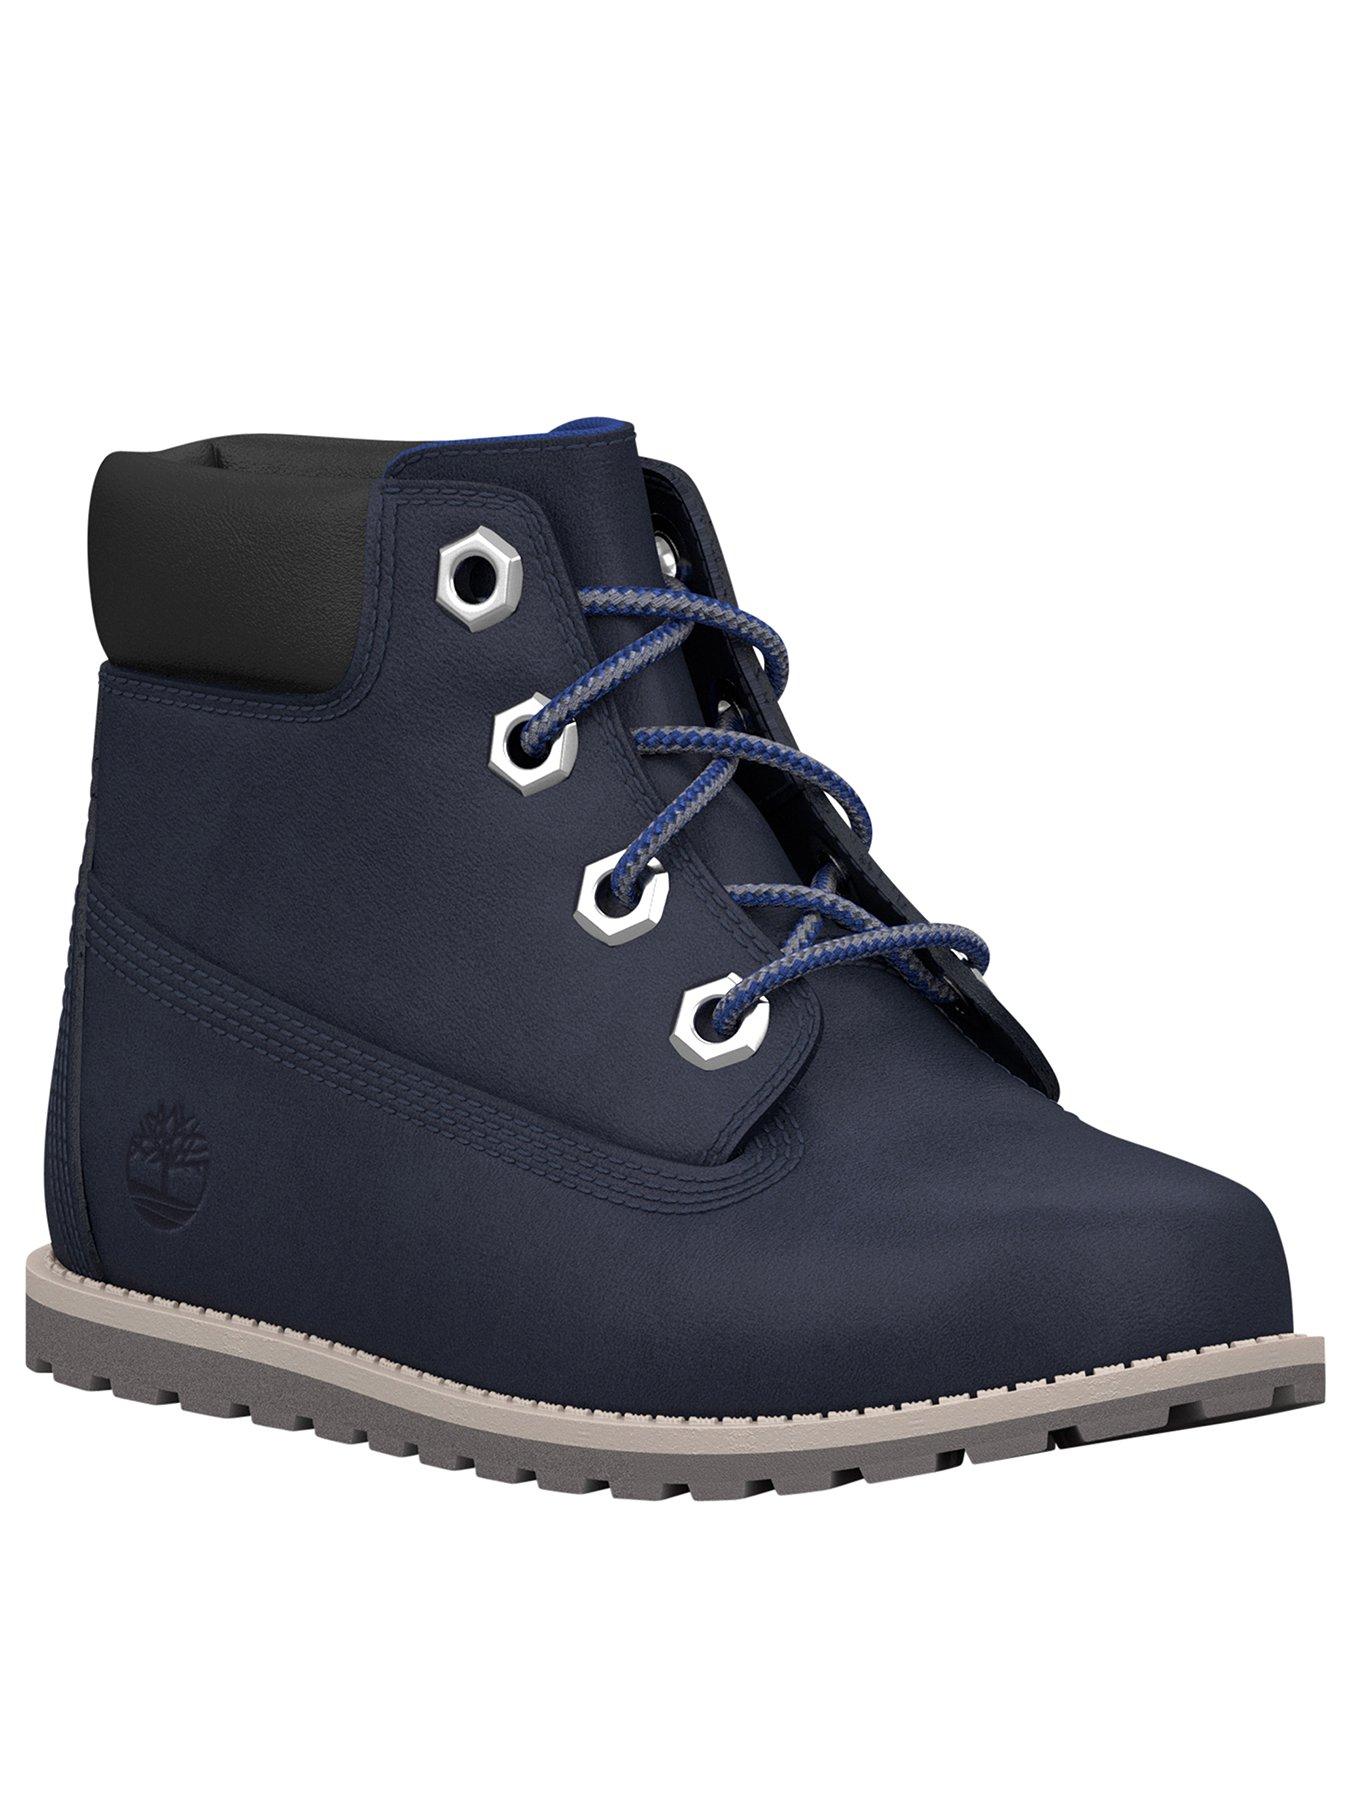 Timberland Boots | Shoes & boots | Child & baby | Very Ireland